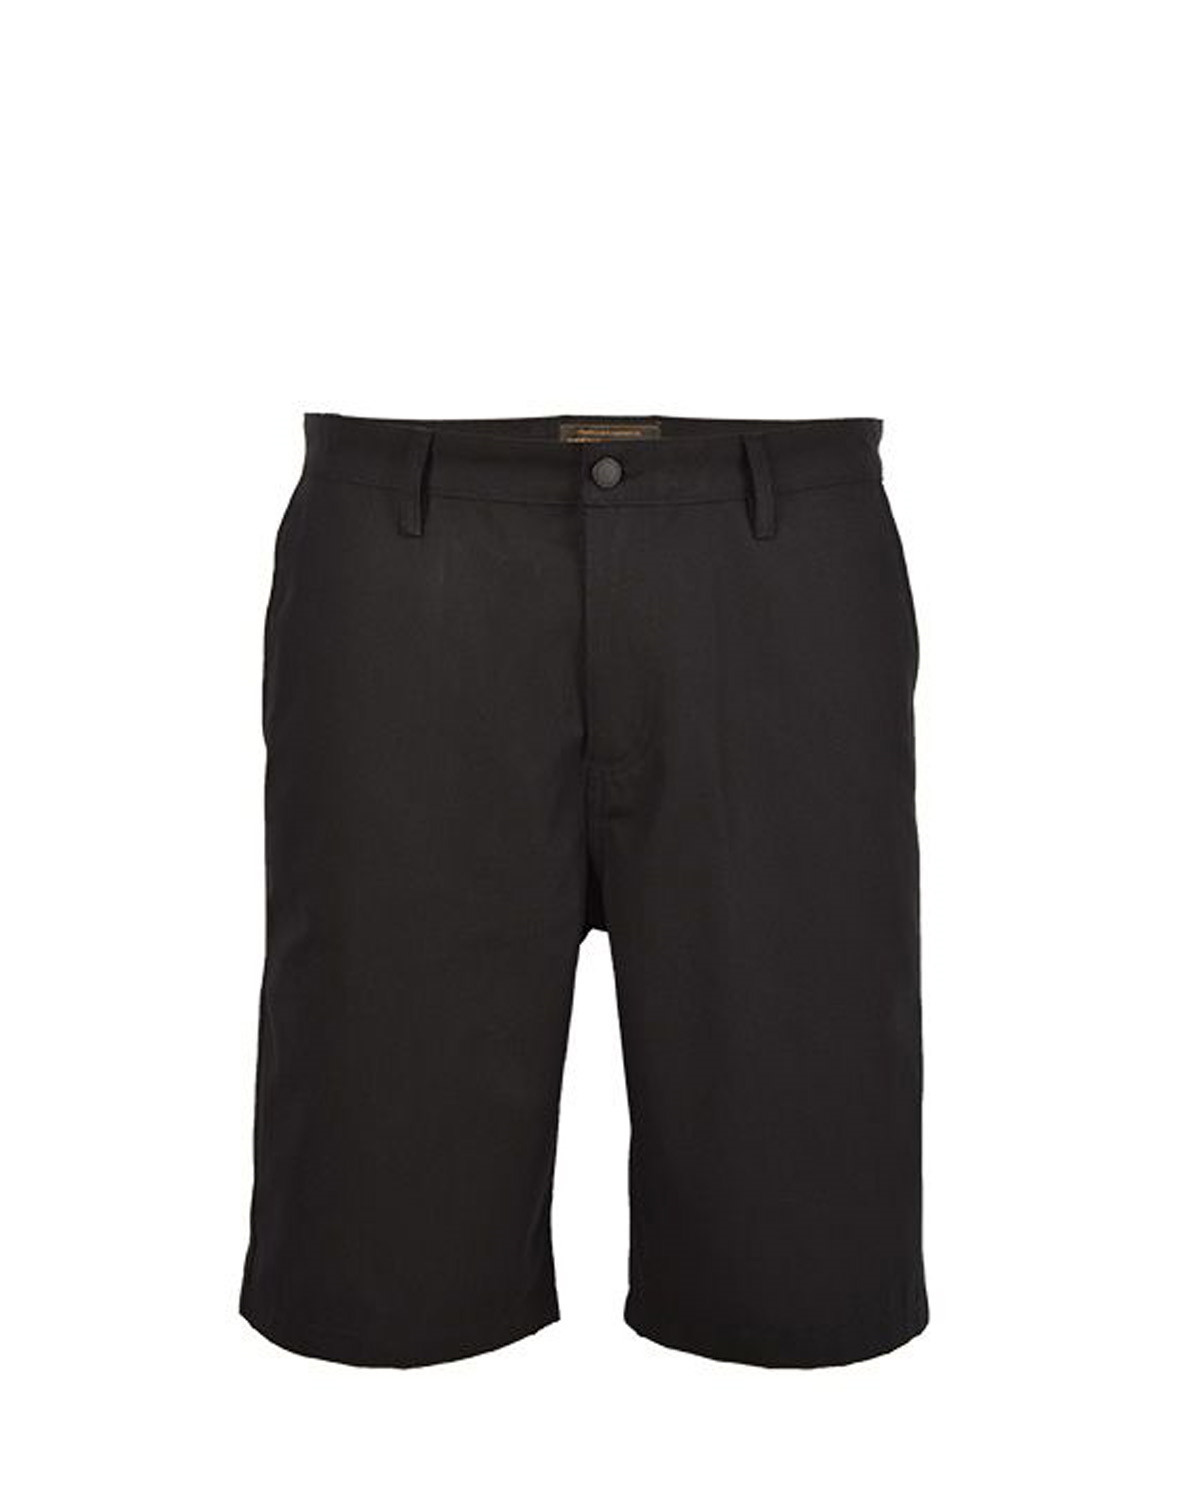 WRENCHMONKEES Simple Shorts (Sort, W32)